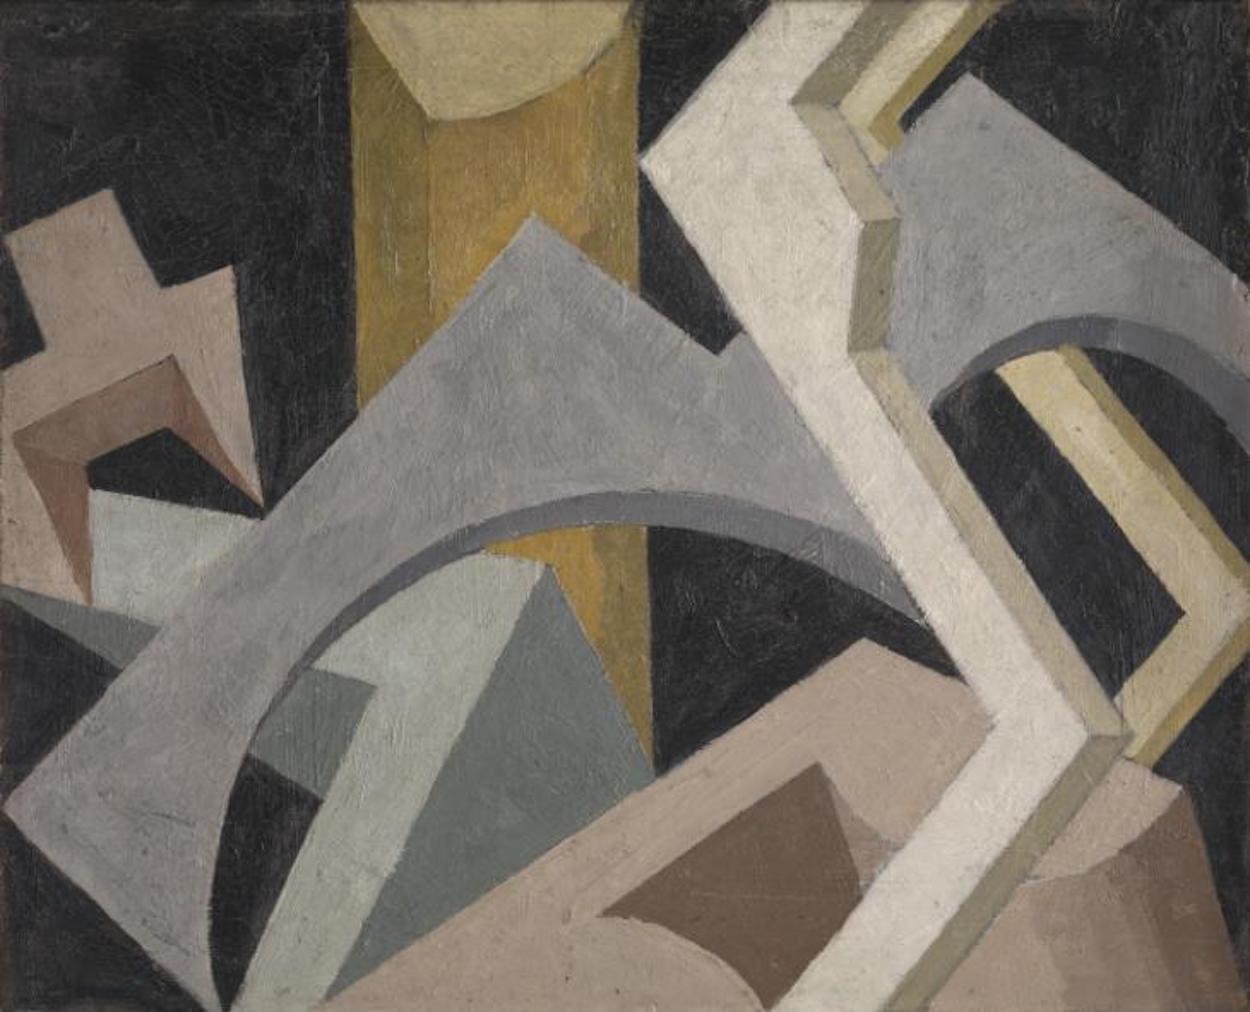 Abstract Composition by Jessica Dismorr - c. 1917 - 41.3 × 50.8 cm Tate Modern